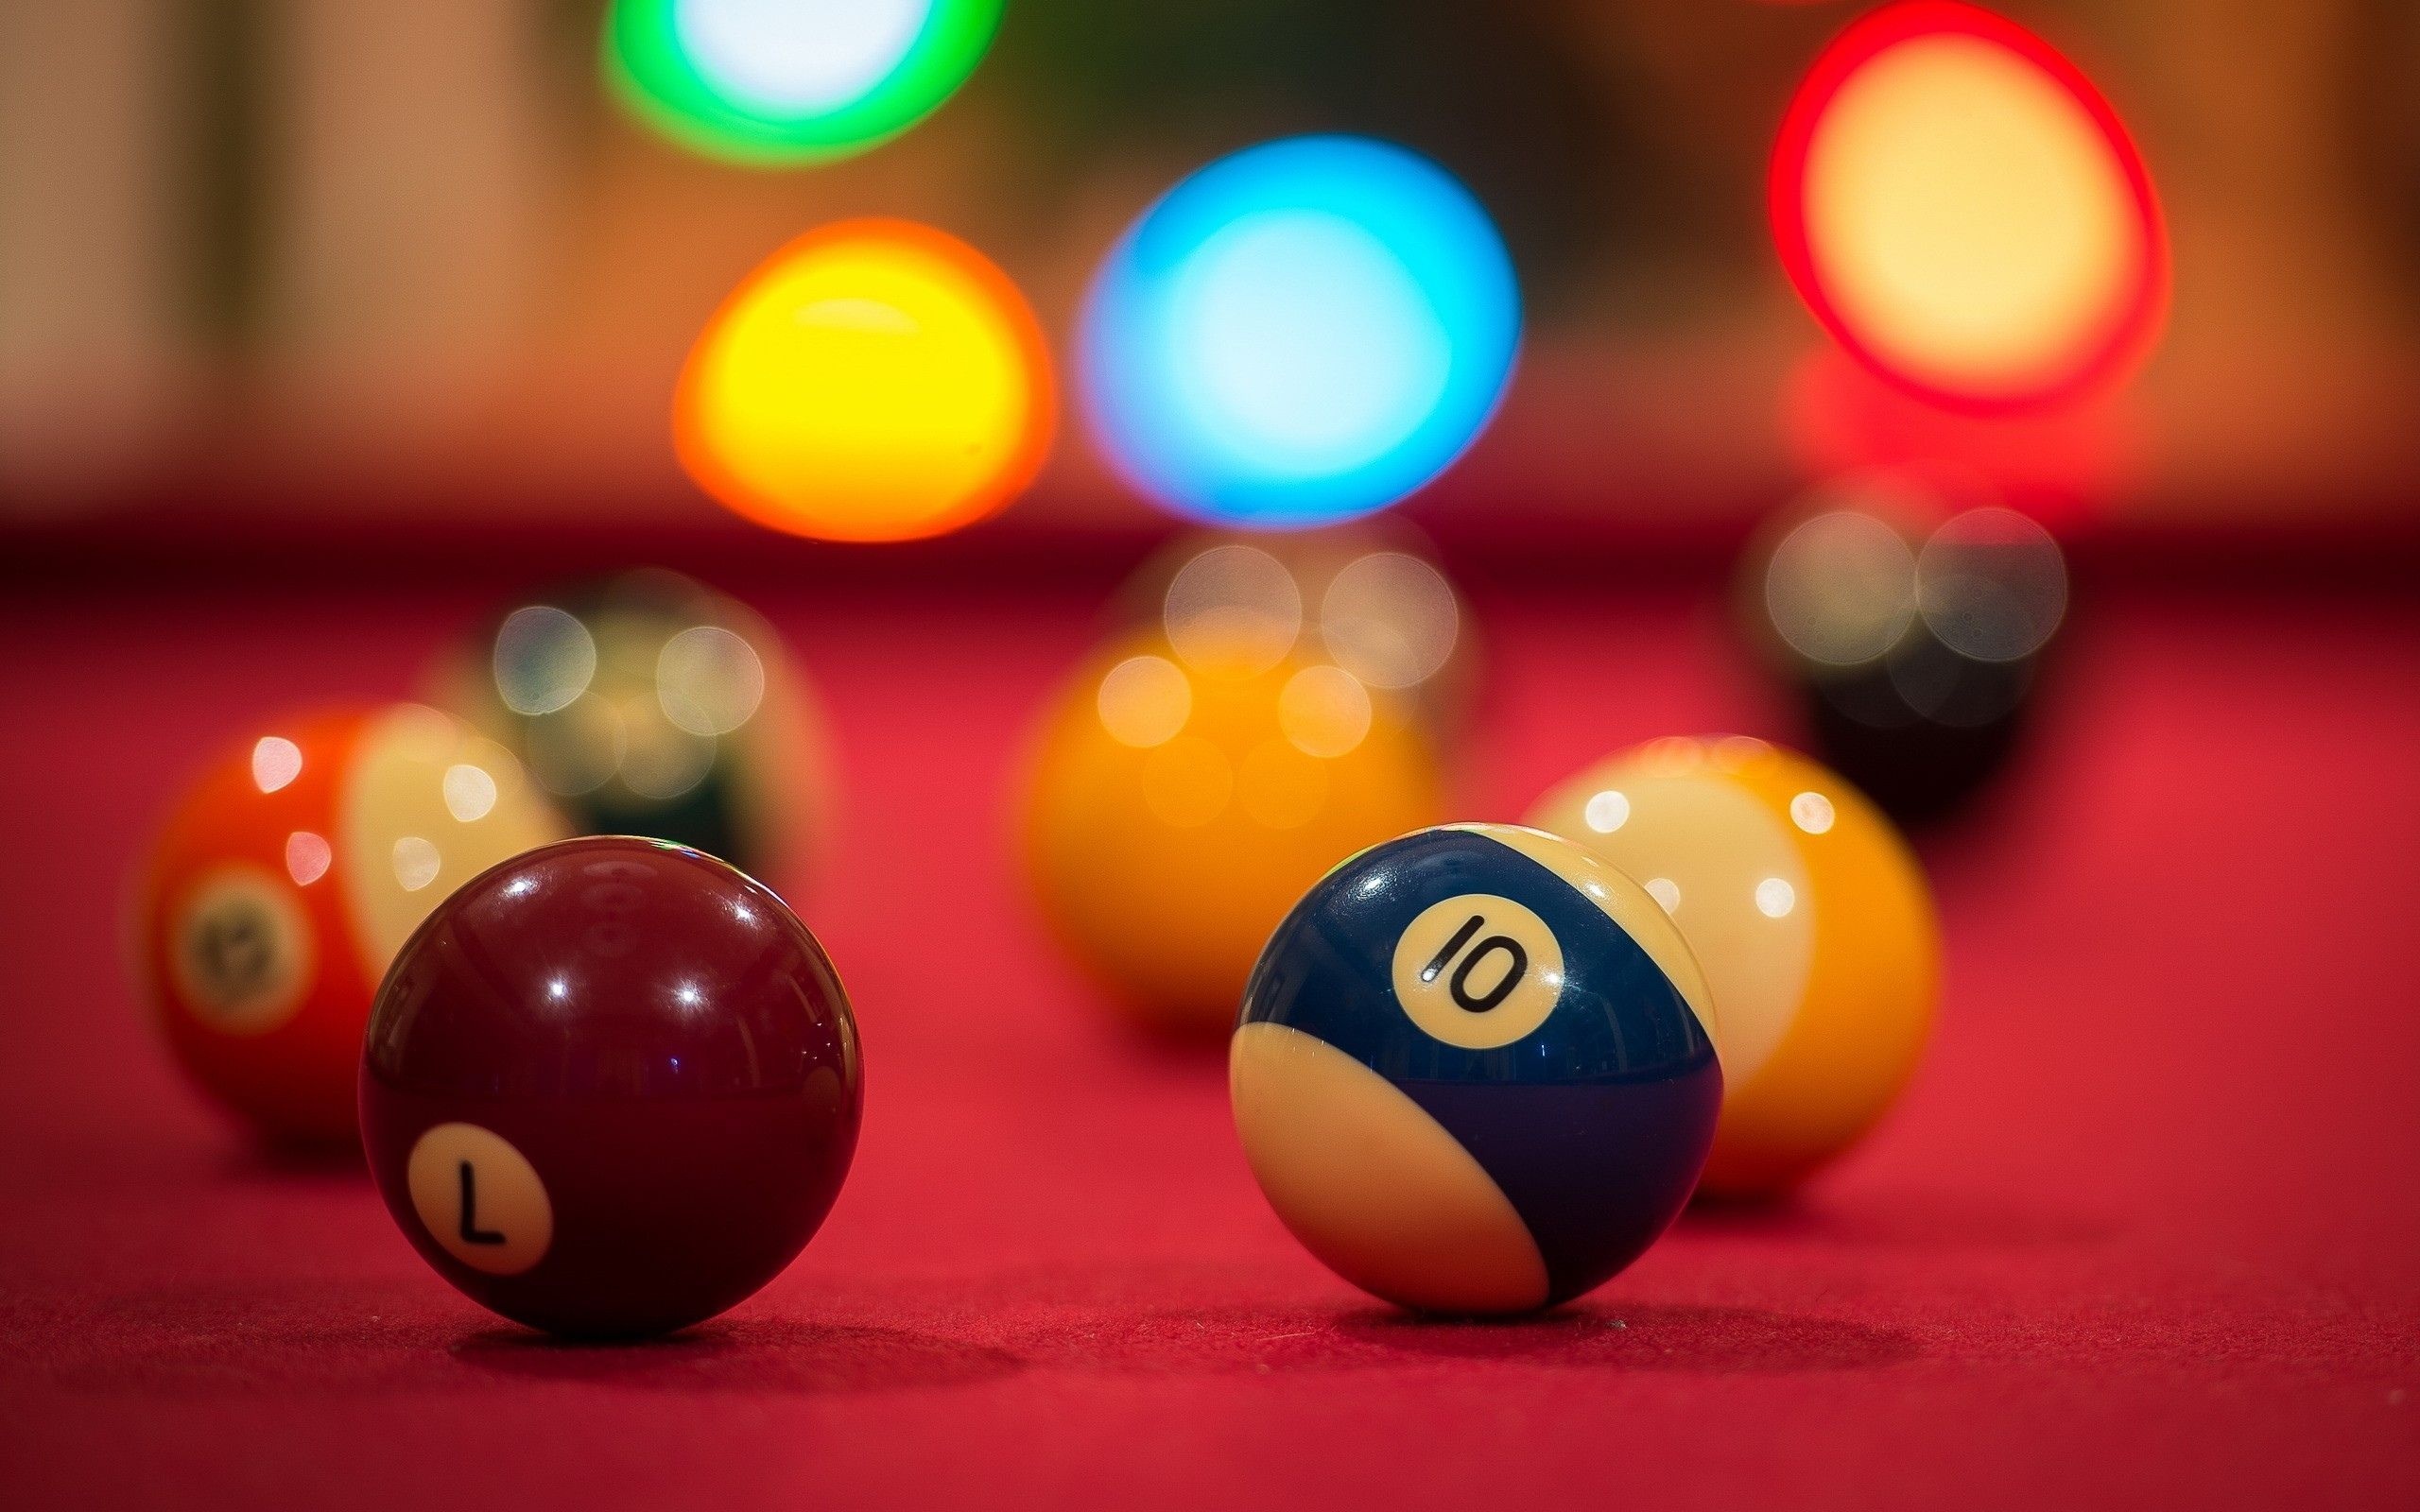 Pool (Cue Sports): Fifteen object balls - small solid balls used in billiard games as targets. 2560x1600 HD Wallpaper.